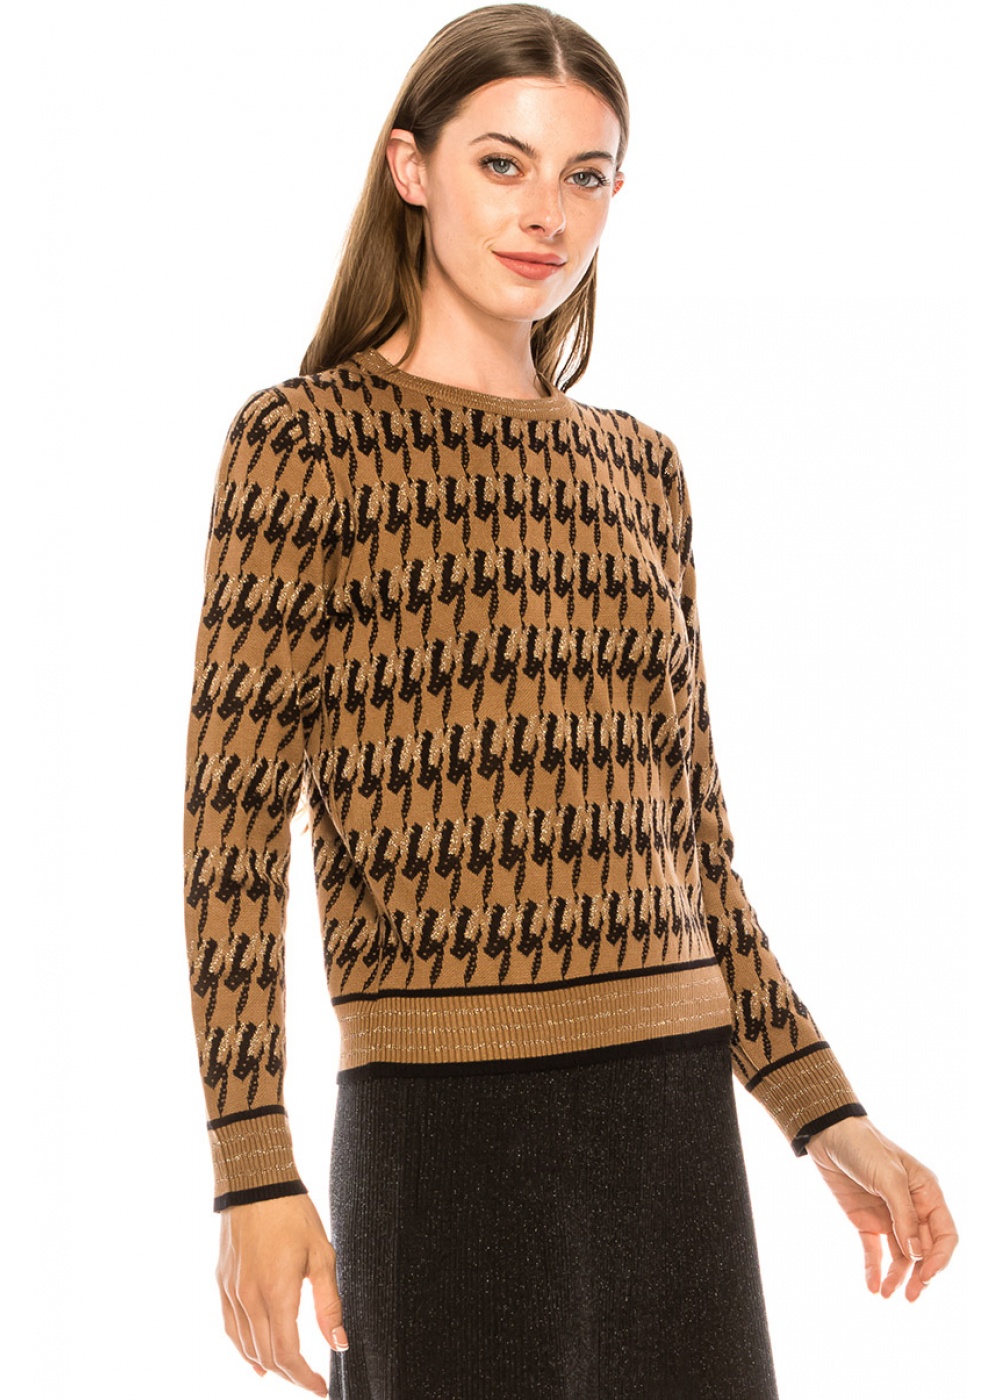 Crew neck houndstooth sweater in camel